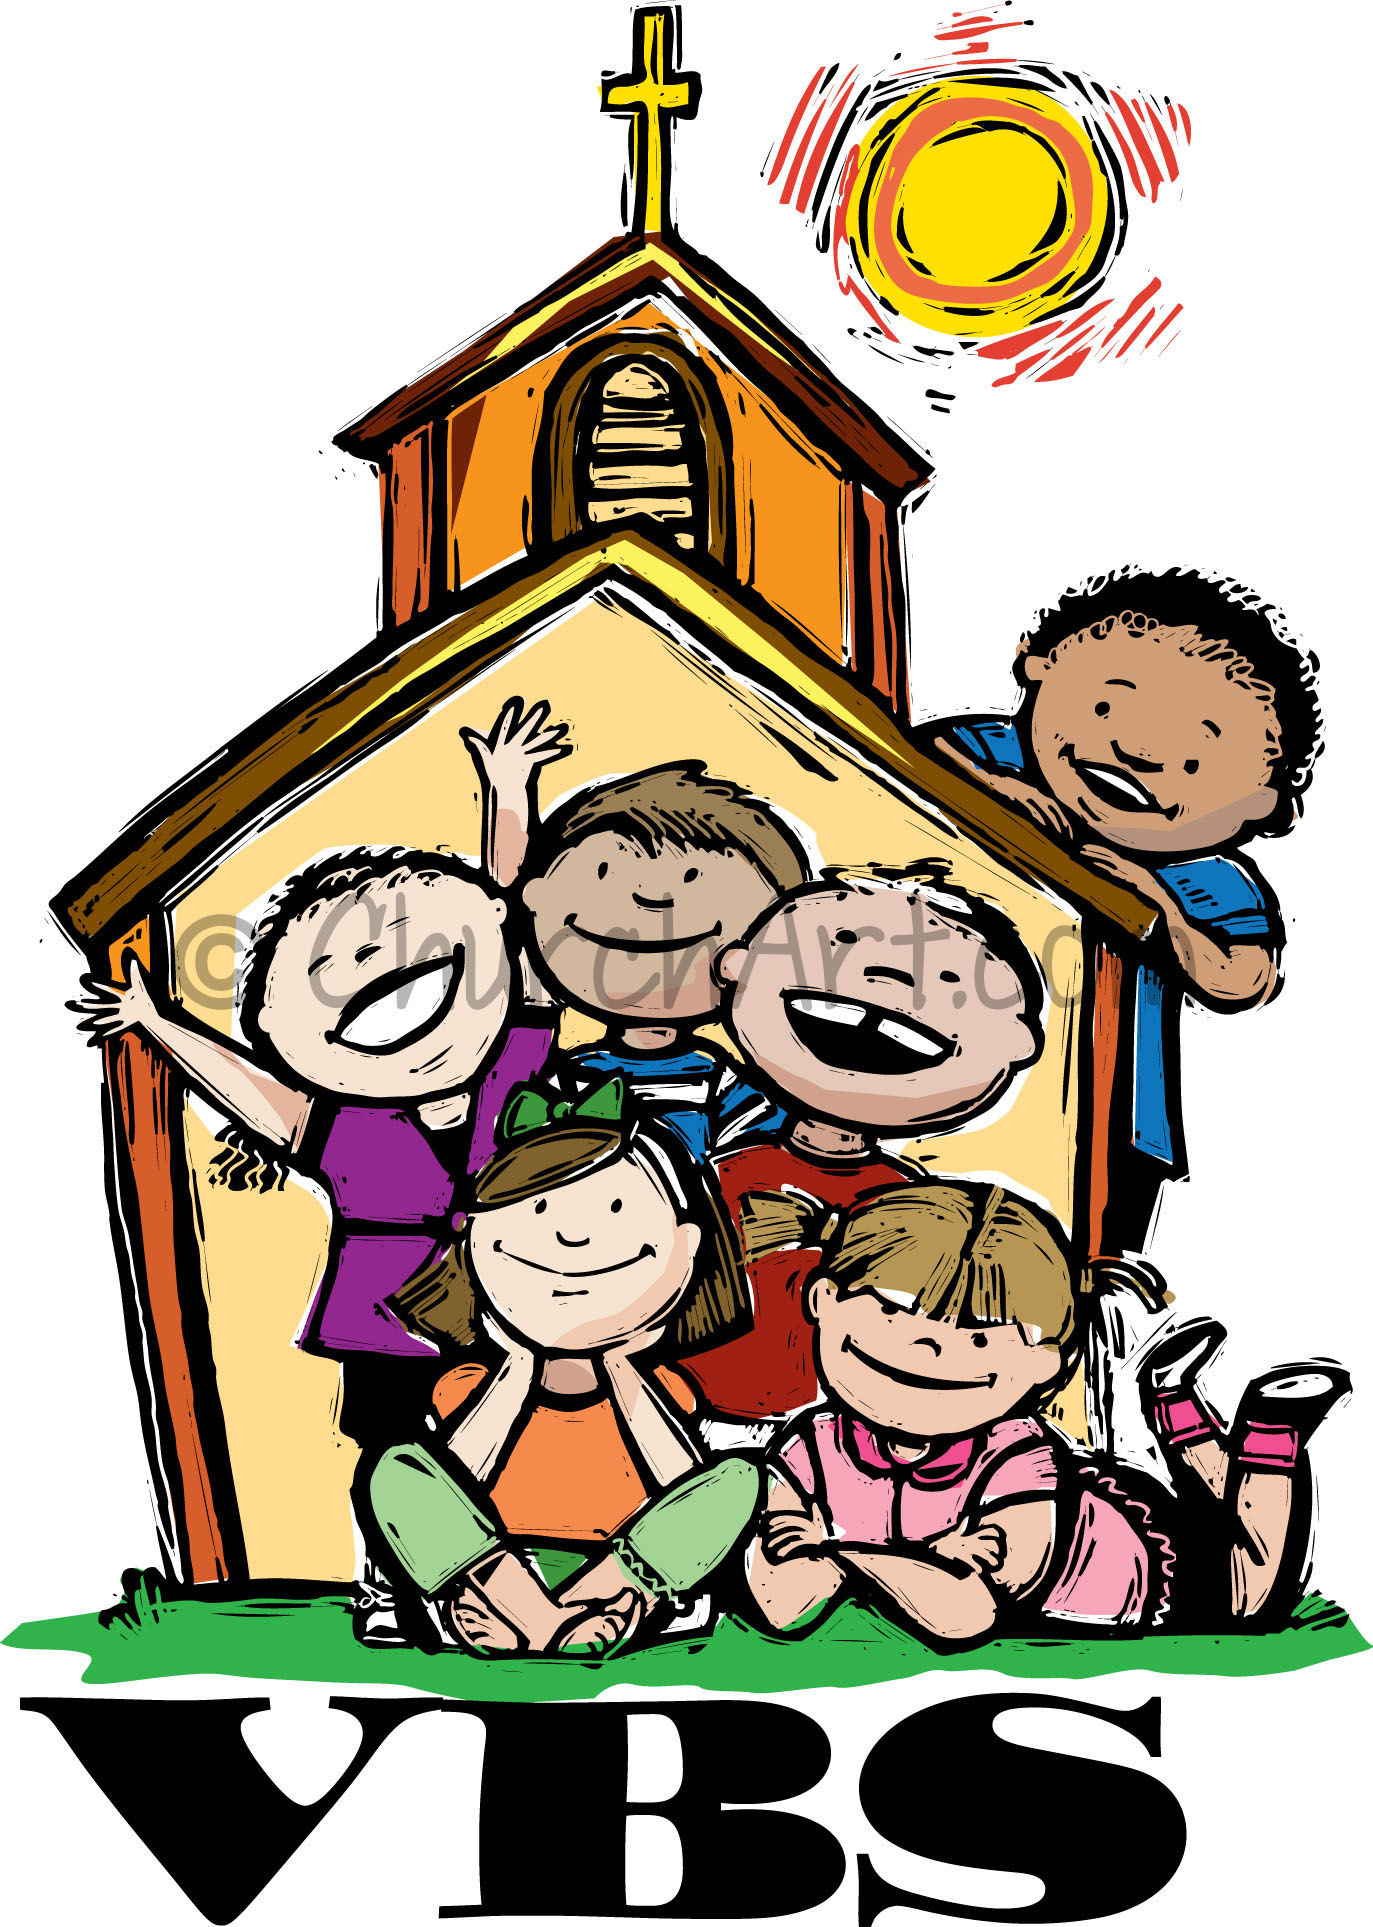 Vacation Bible school graphic showing students